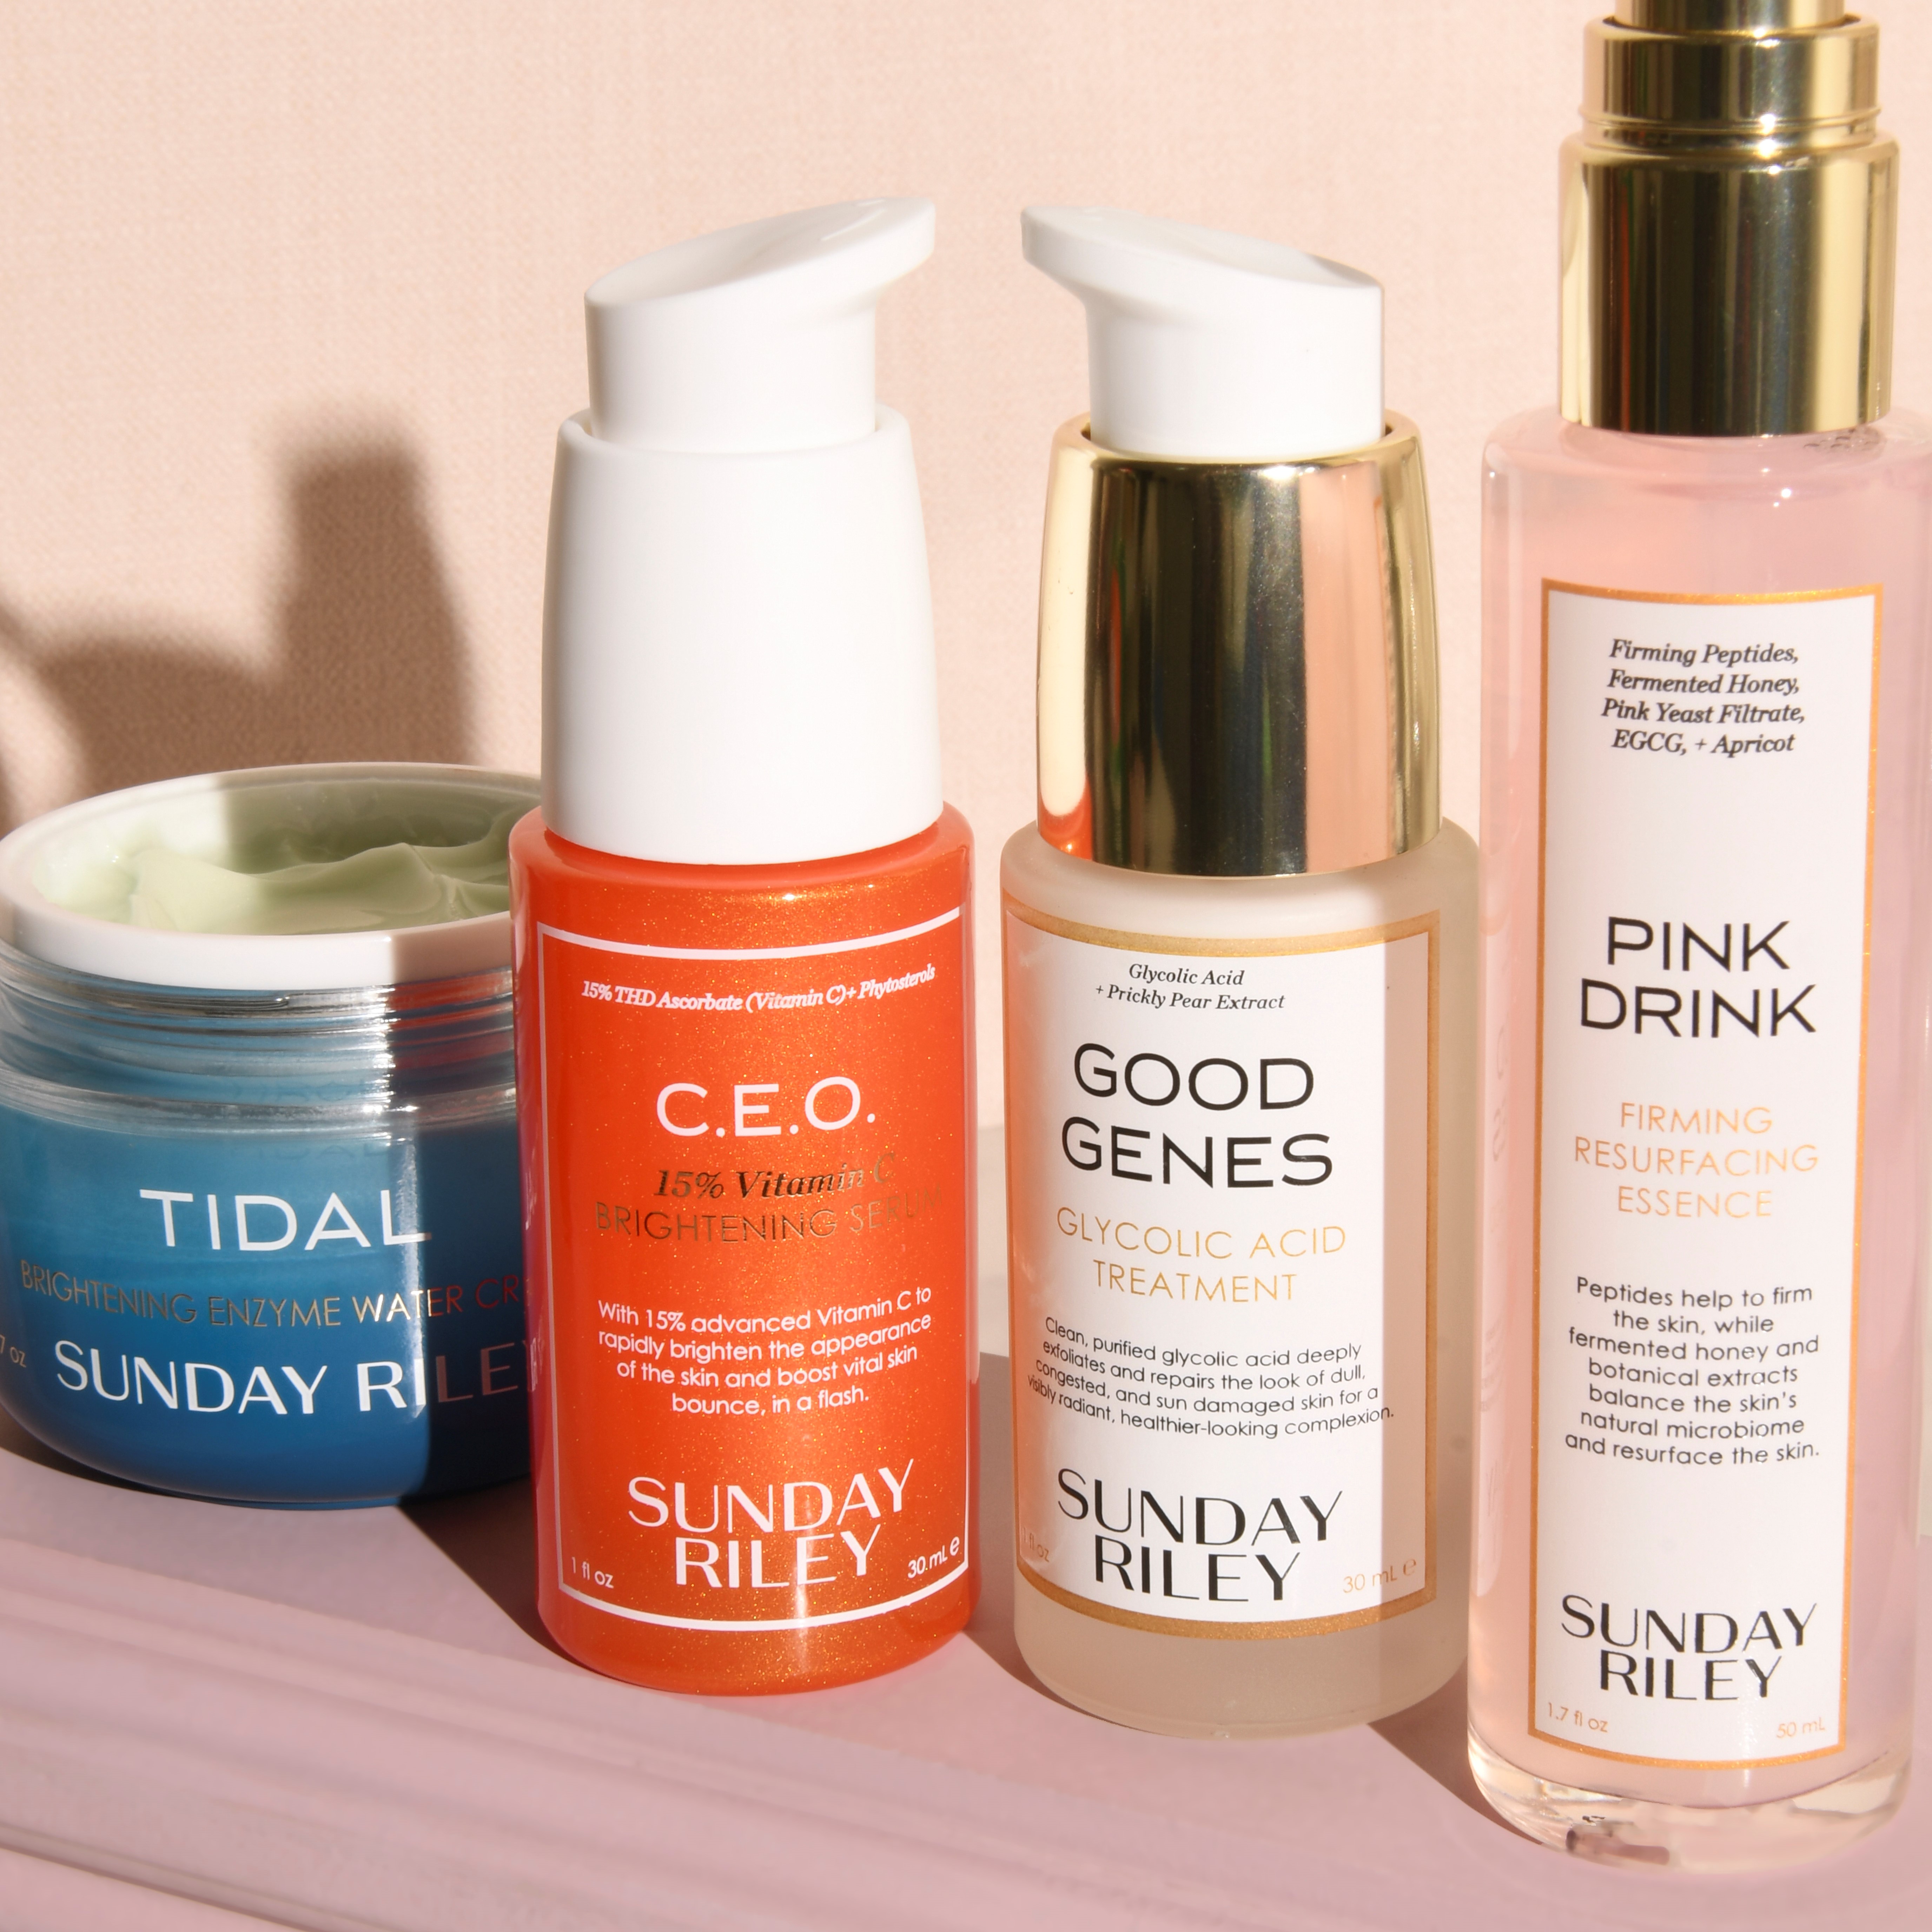 Our Top 5 Sunday Riley Skincare Bestsellers